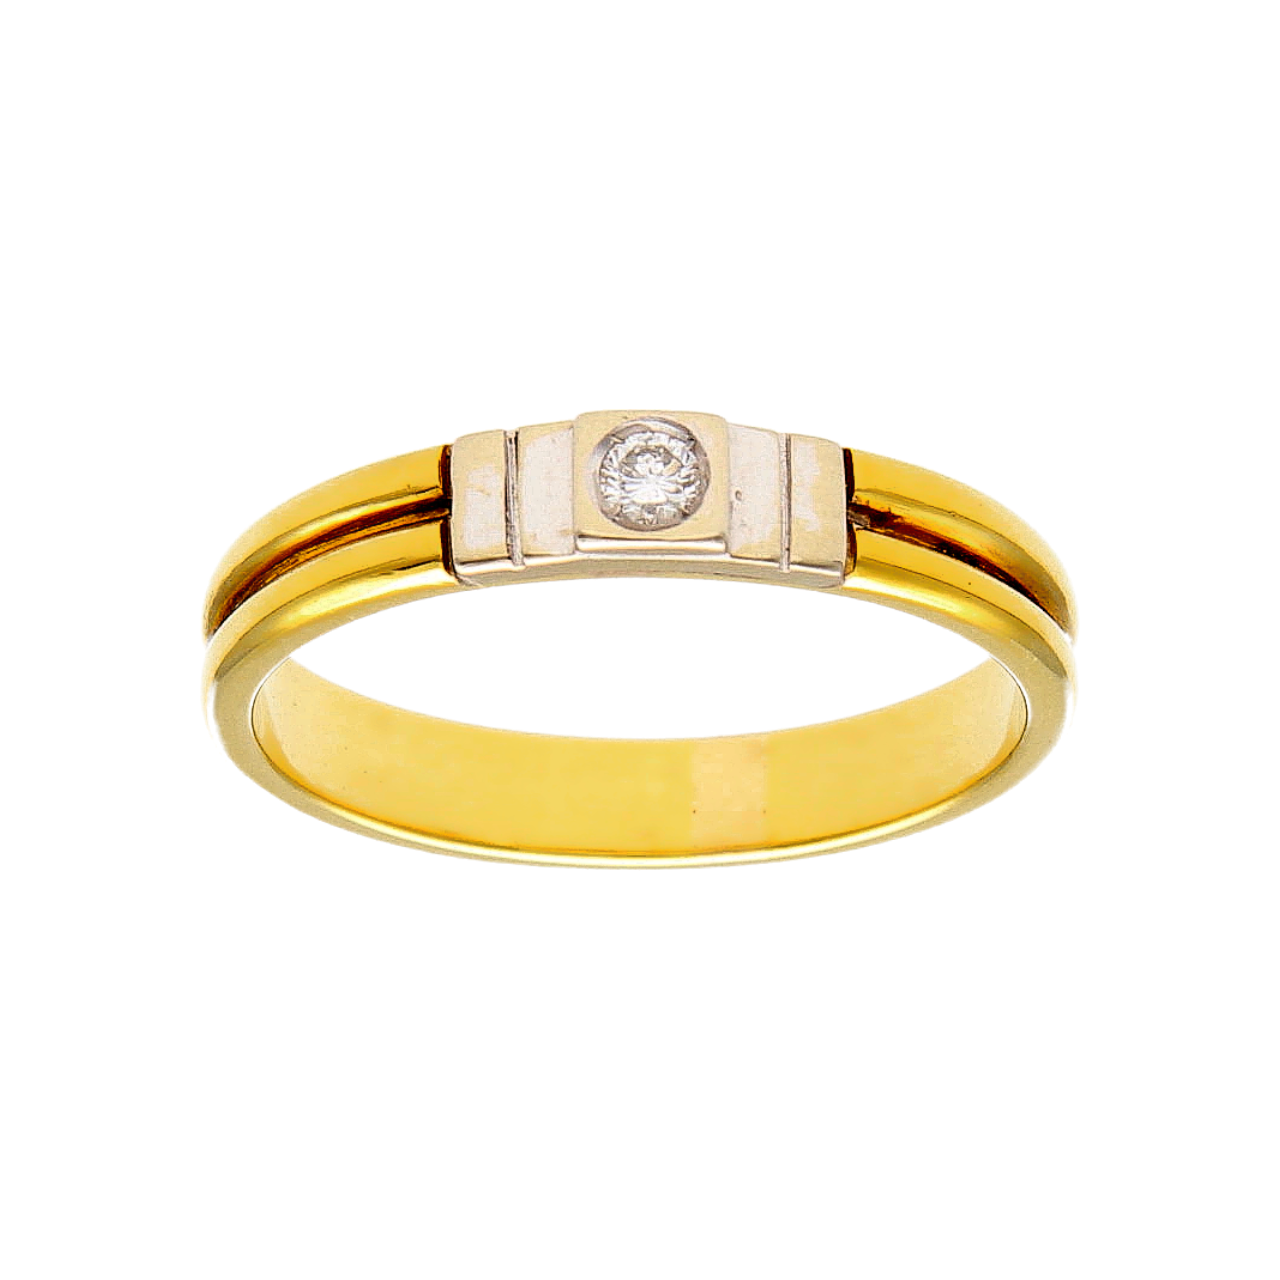 Yellow and white gold ring with 0.07 ct diamond